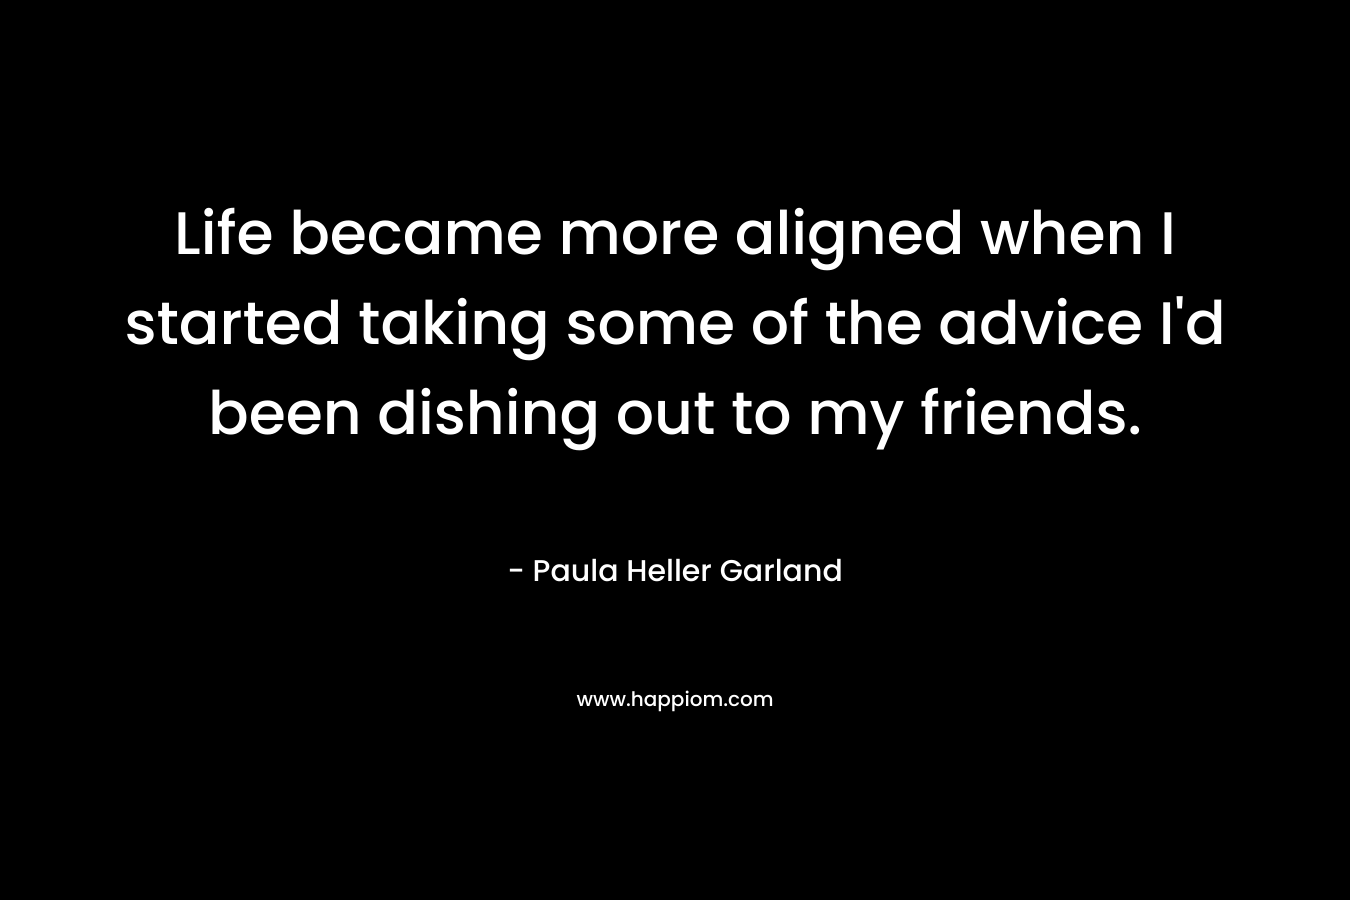 Life became more aligned when I started taking some of the advice I’d been dishing out to my friends. – Paula Heller Garland